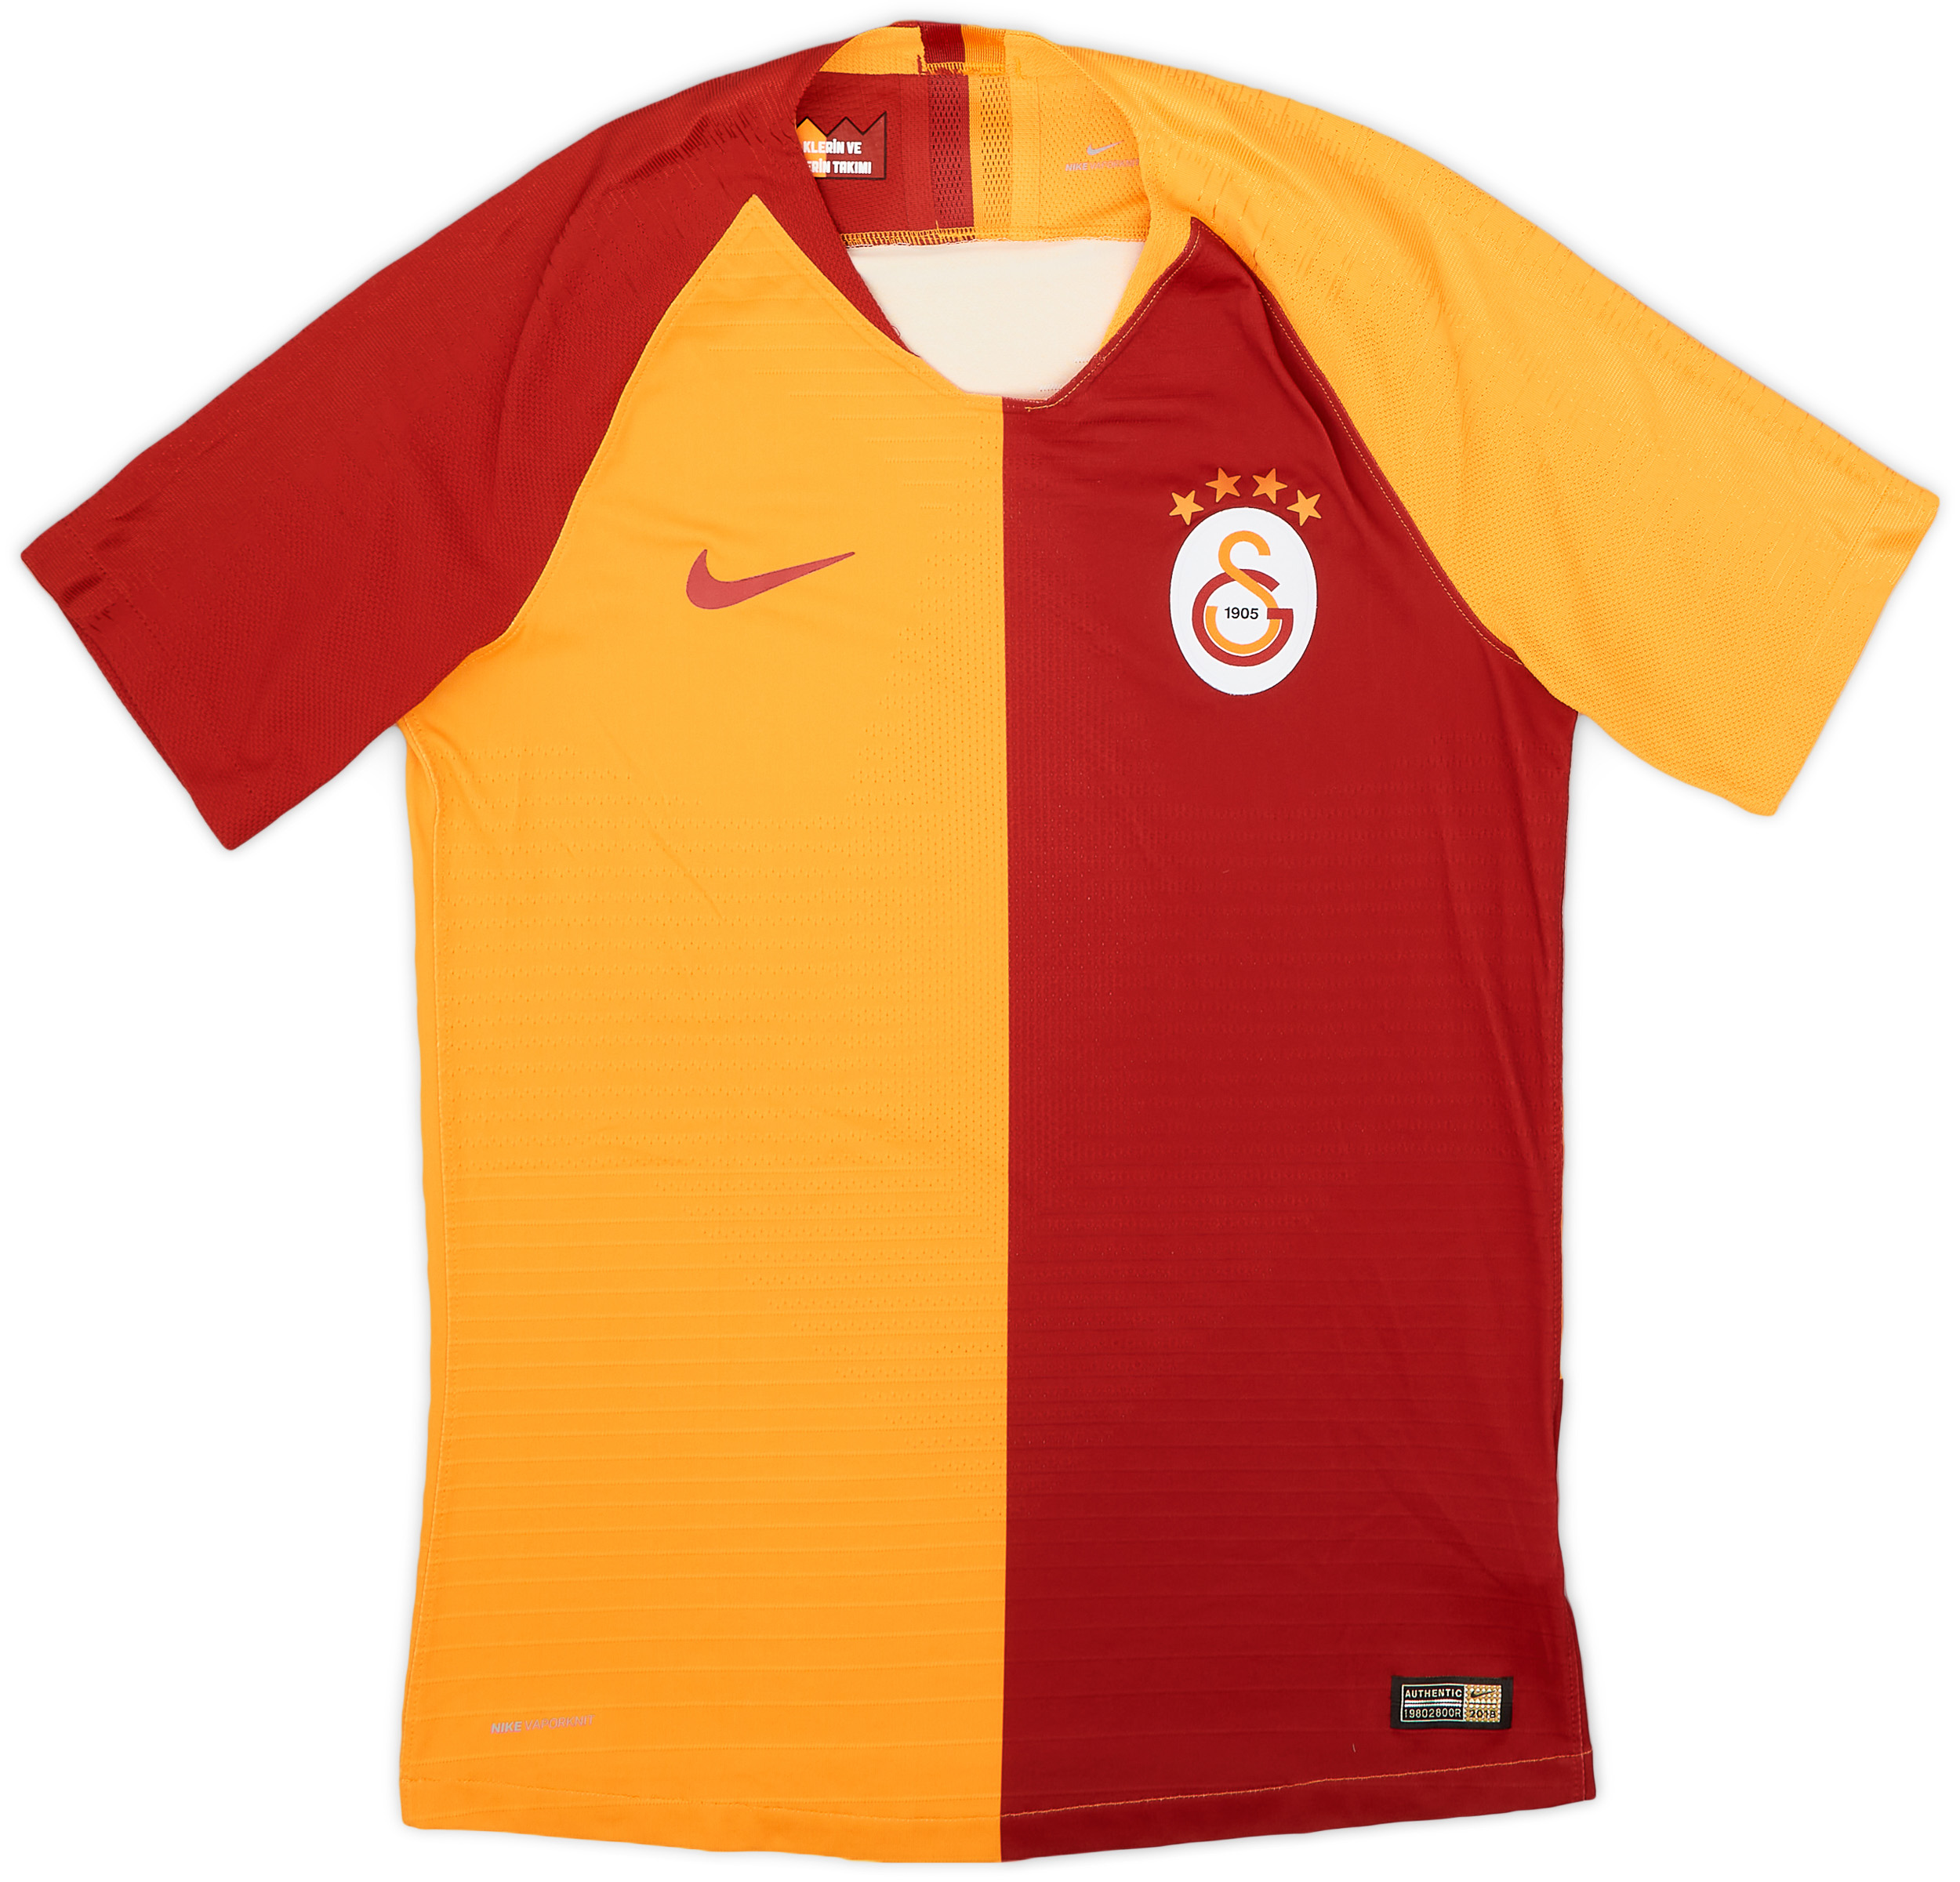 2018-19 Galatasaray Authentic Home Shirt - 8/10 - ()